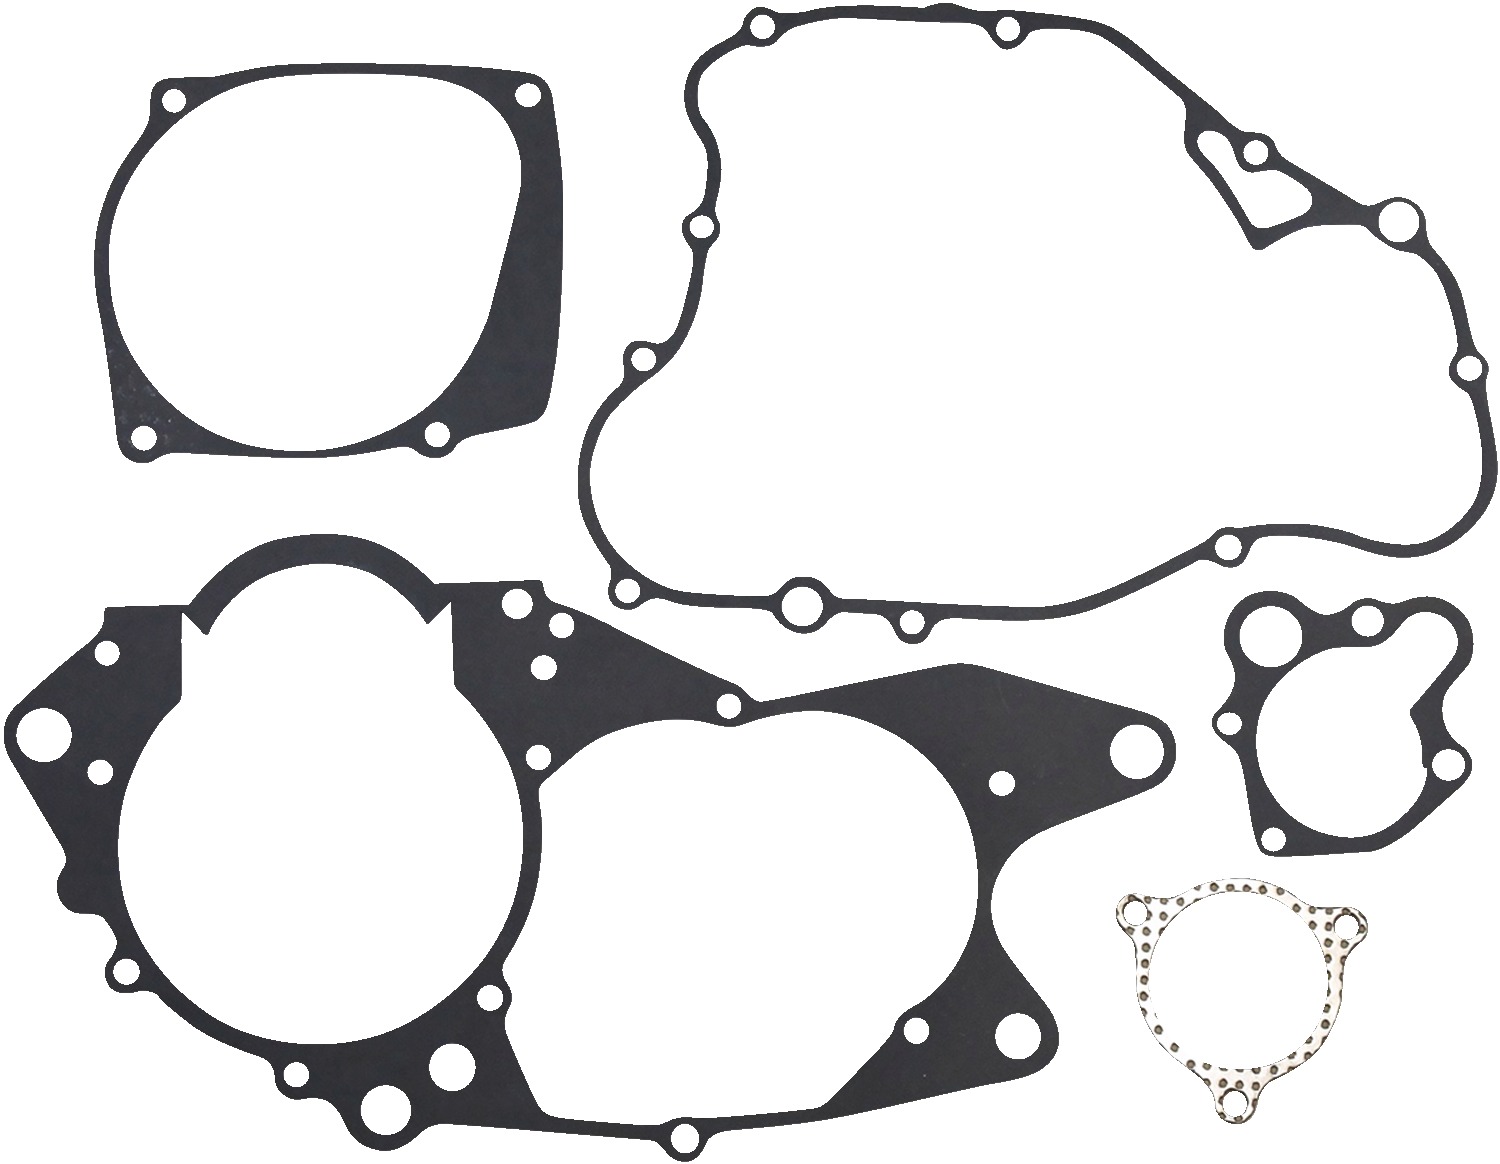 Lower Engine Gasket Kit - For 1981 Honda CR250R - Click Image to Close